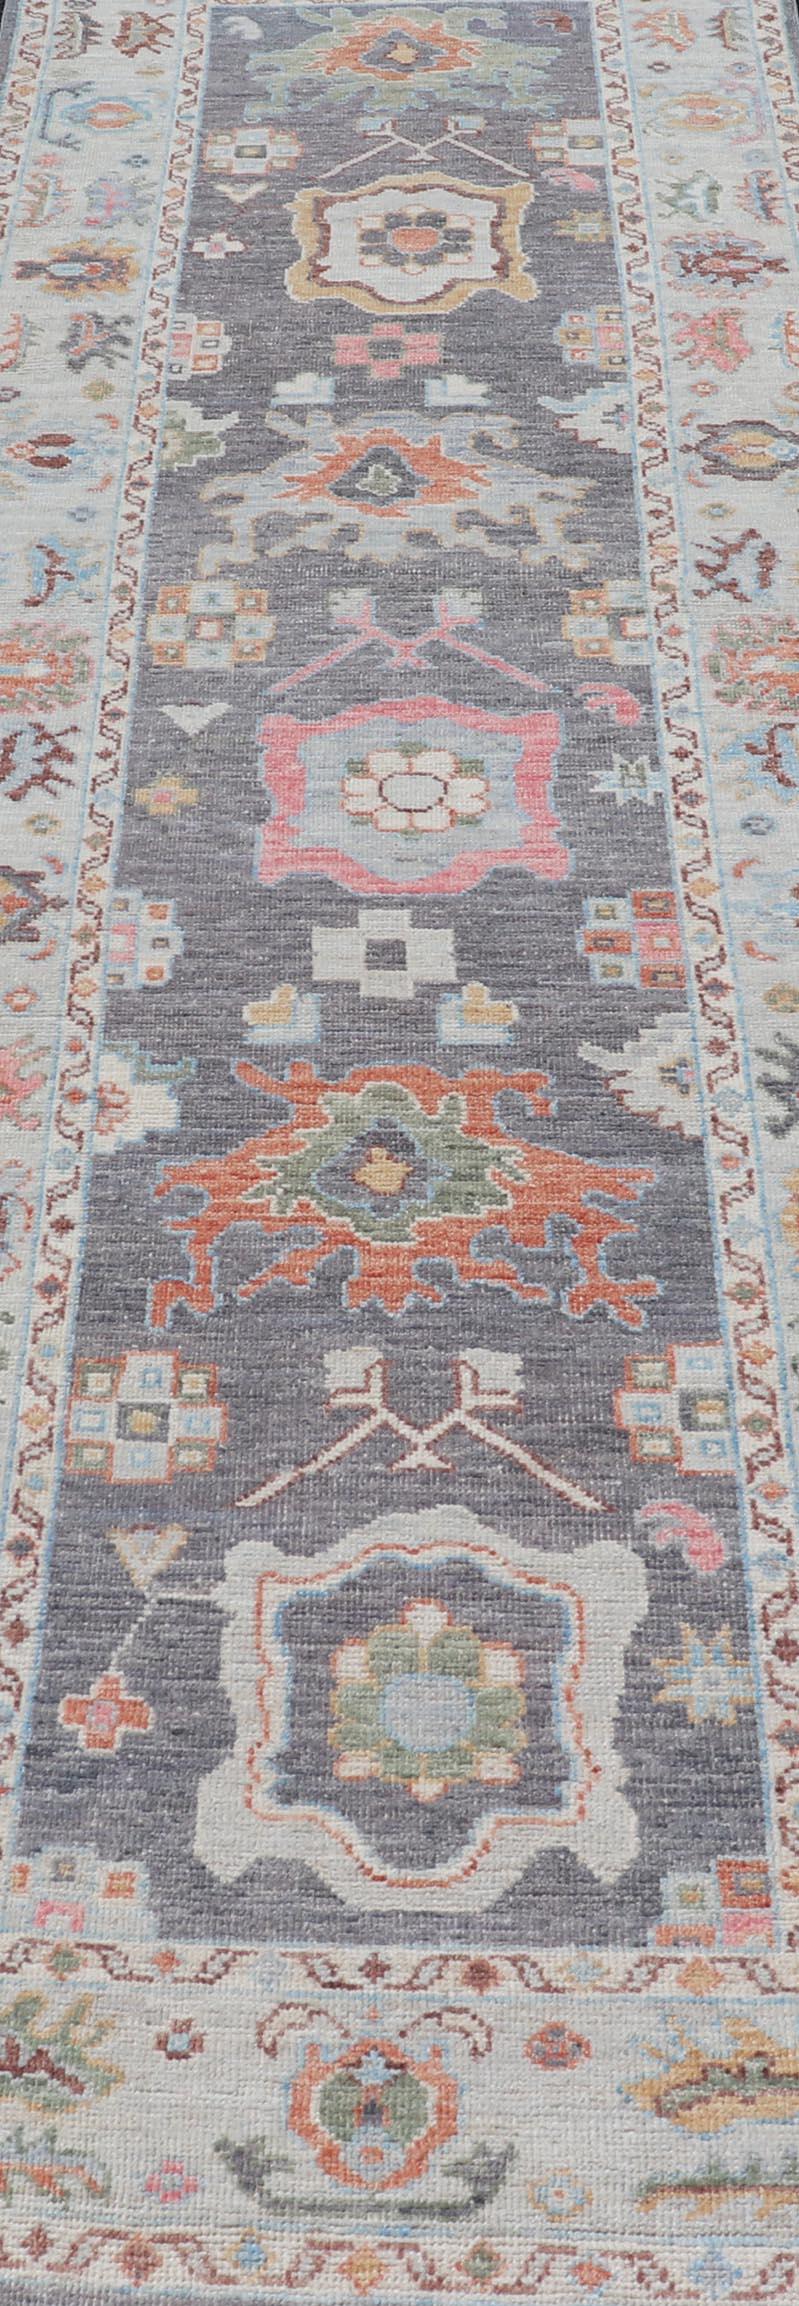 
This Afghan Oushak runner features a grand motif, showcasing from the border to the field with a vibrant elegance that pops against the light blue-gray border, as well as the charcoal background throughout the center. The intricate details in the